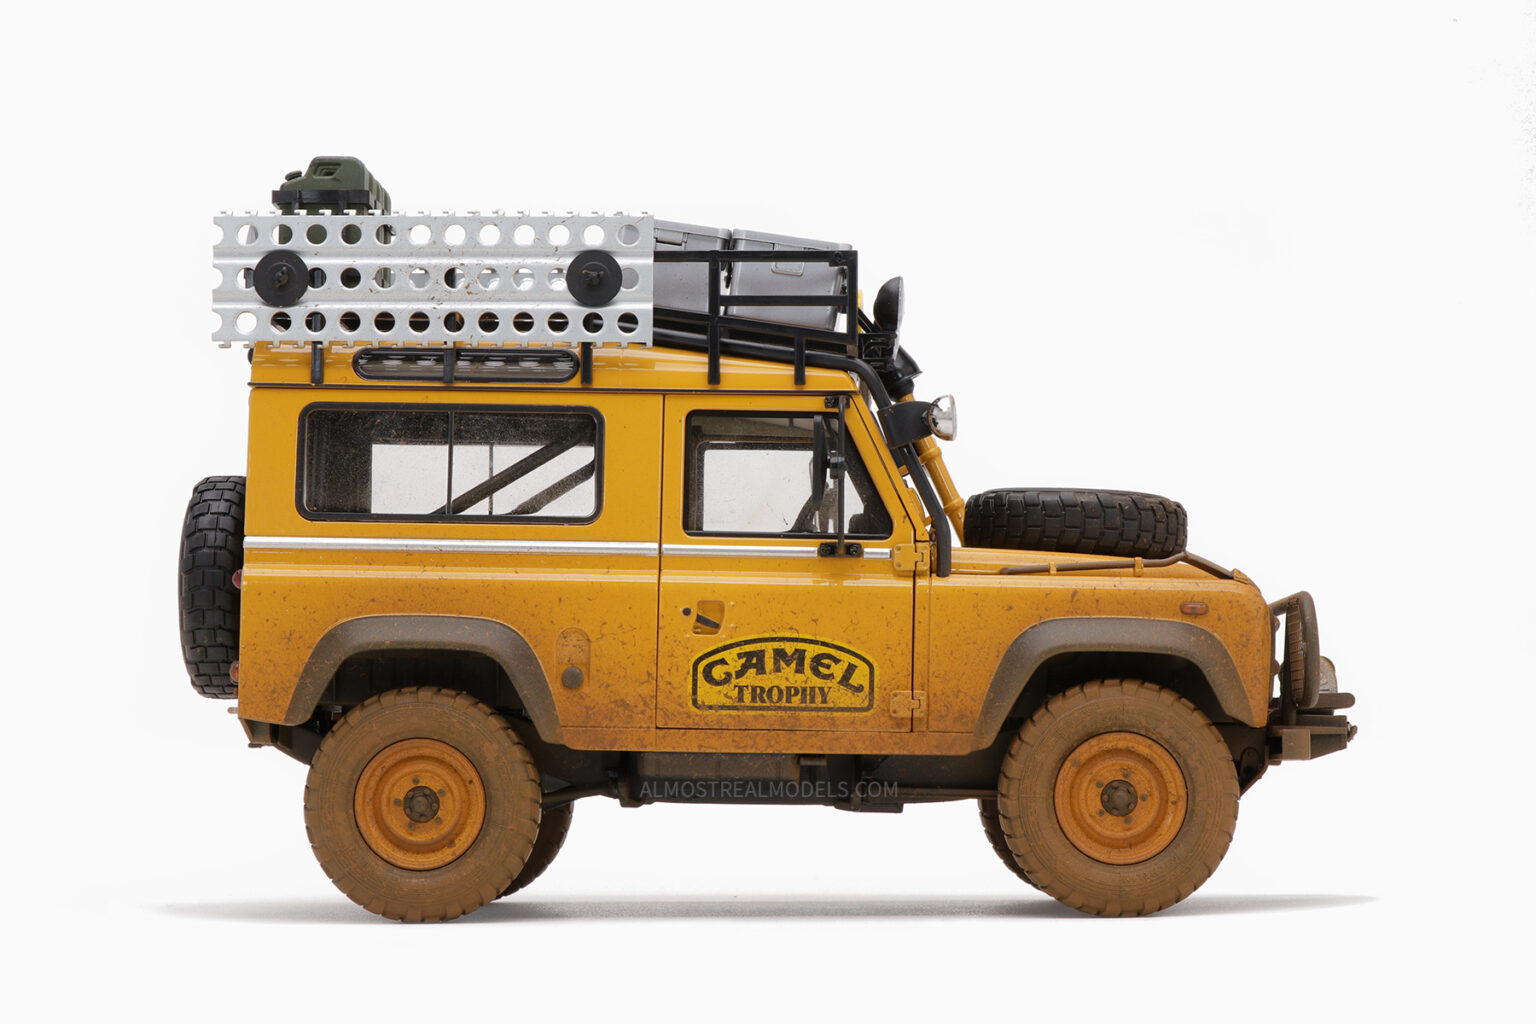 ALMOST REAL 810212 118 Land Rover Defender 90 “Camel